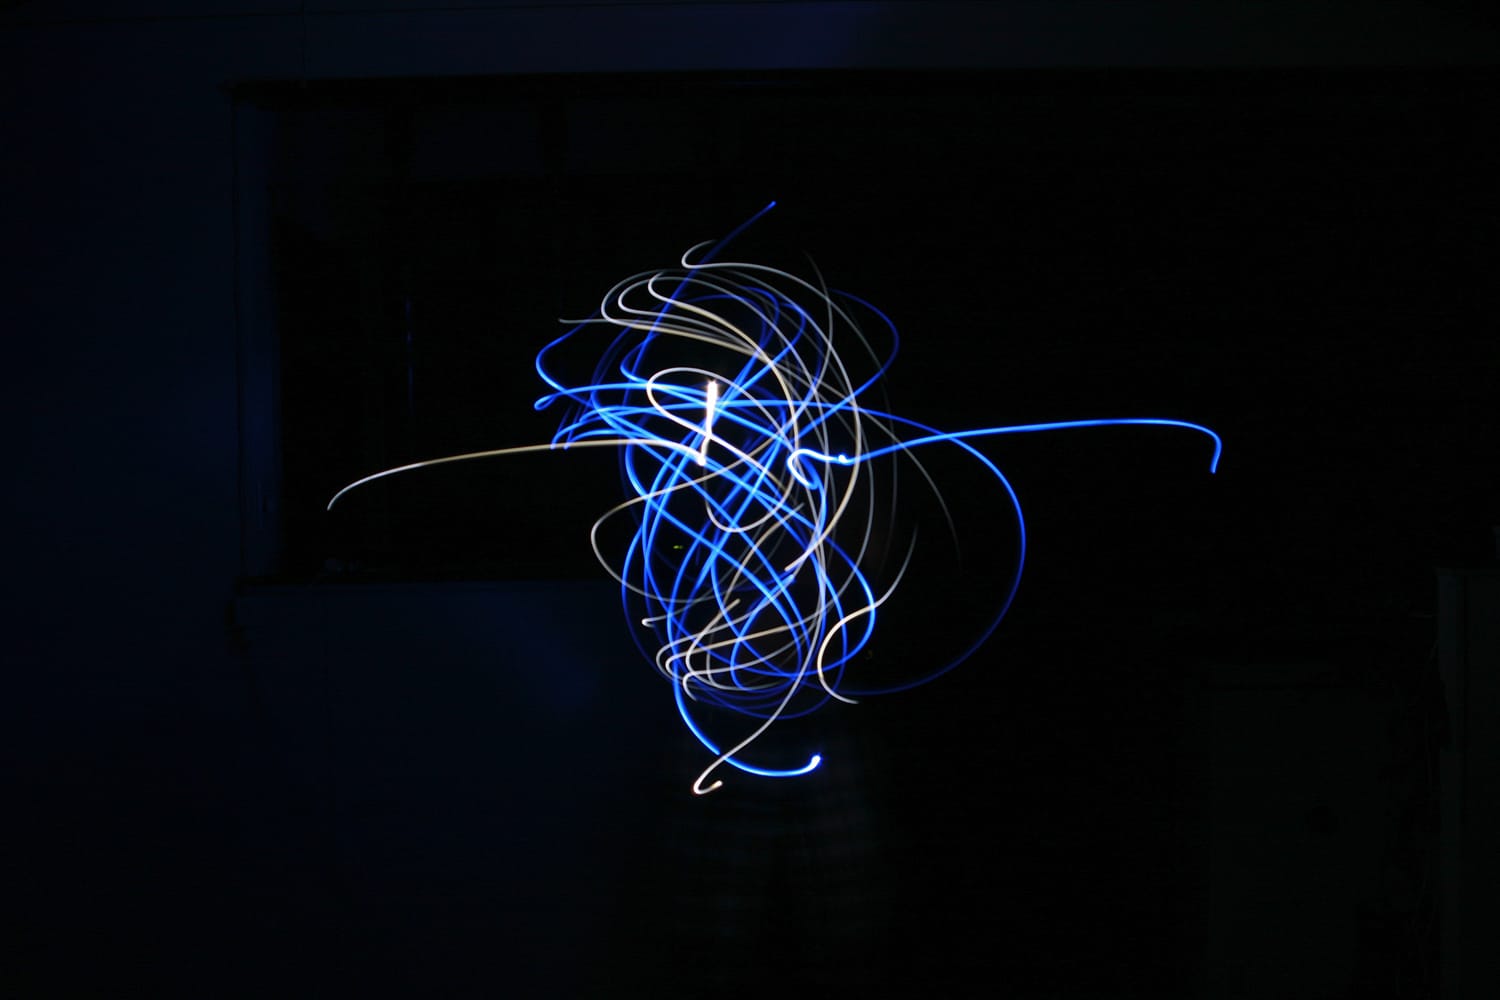 Paint light trails with a flashlight